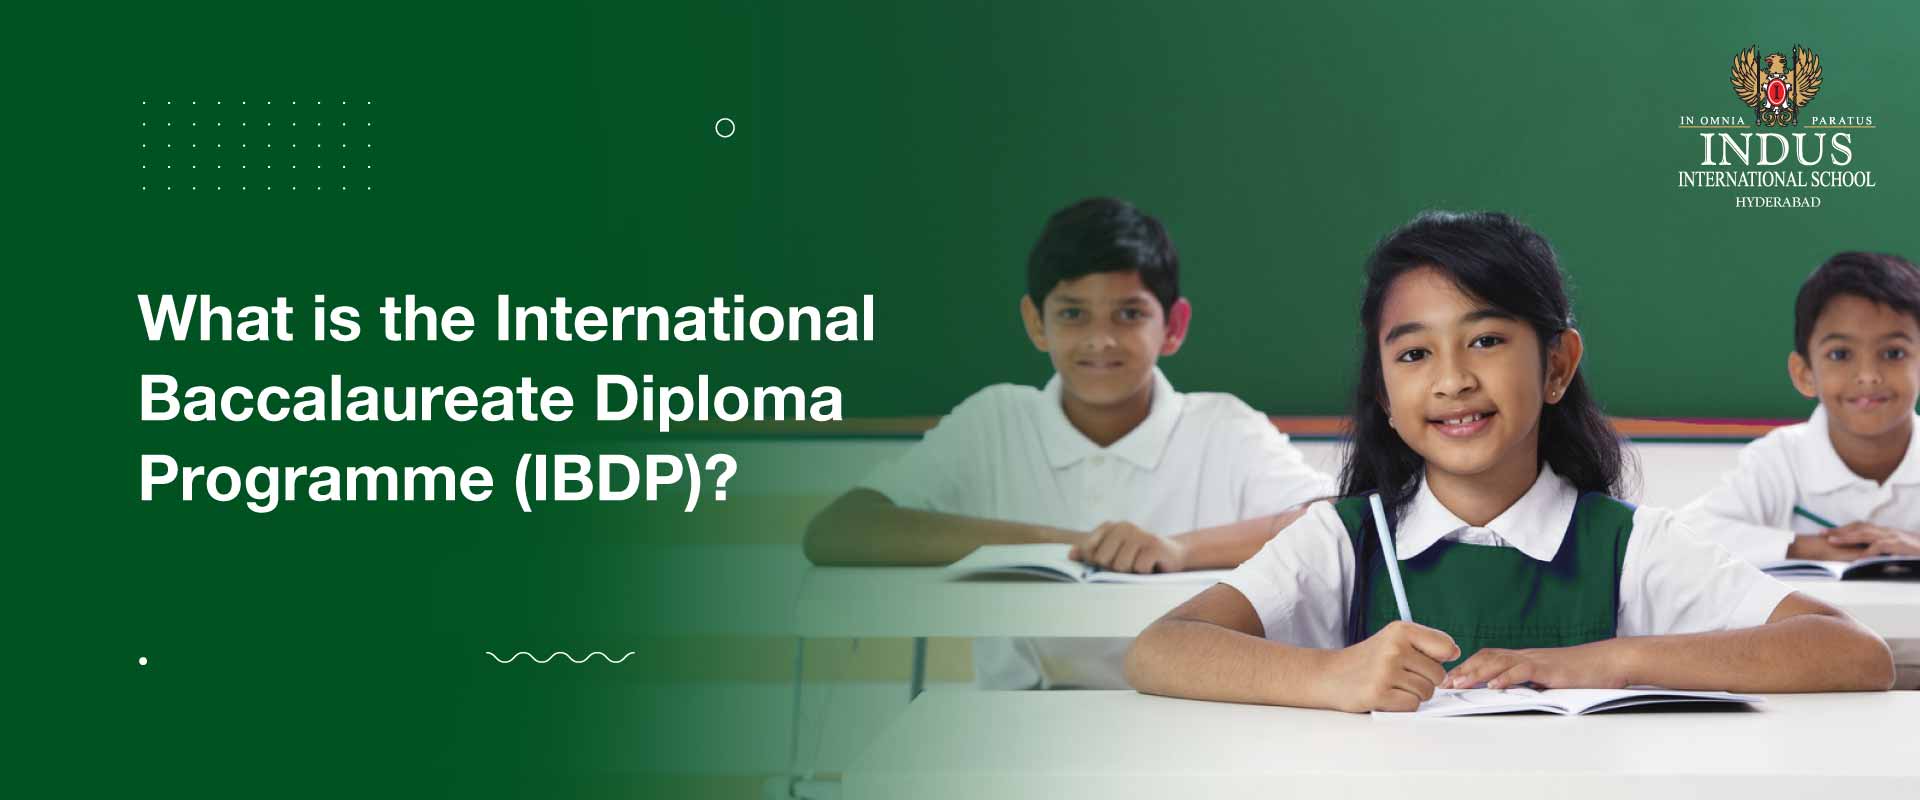 What is the International Baccalaureate Diploma Programme (IBDP)?